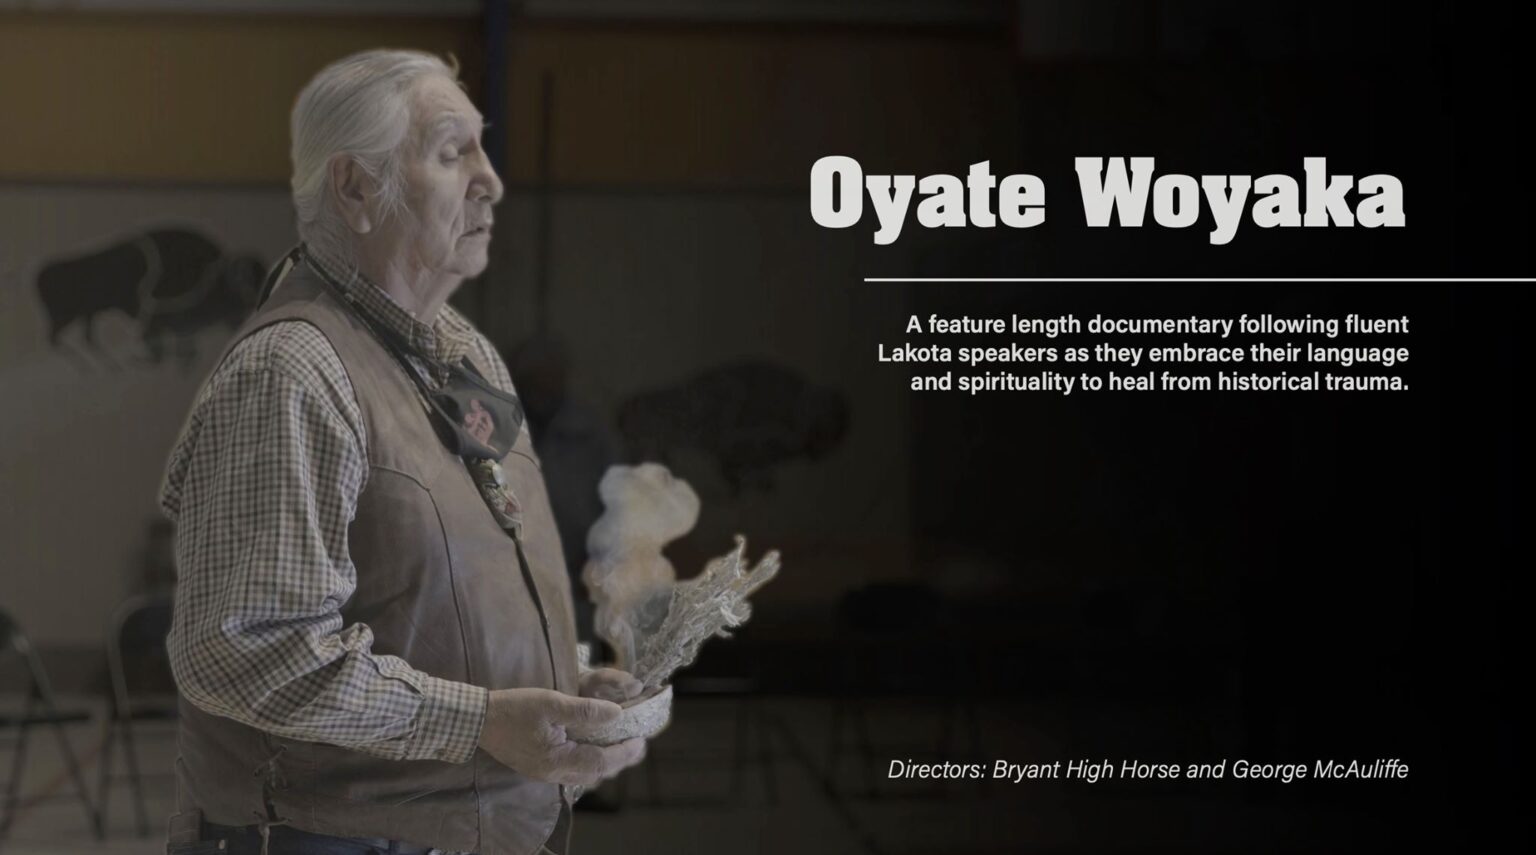 A crowd-funded feature-length documentary aims to help revitalize the Lakota language. Discover the inspiring film project 'Oyate Woyaka' today.